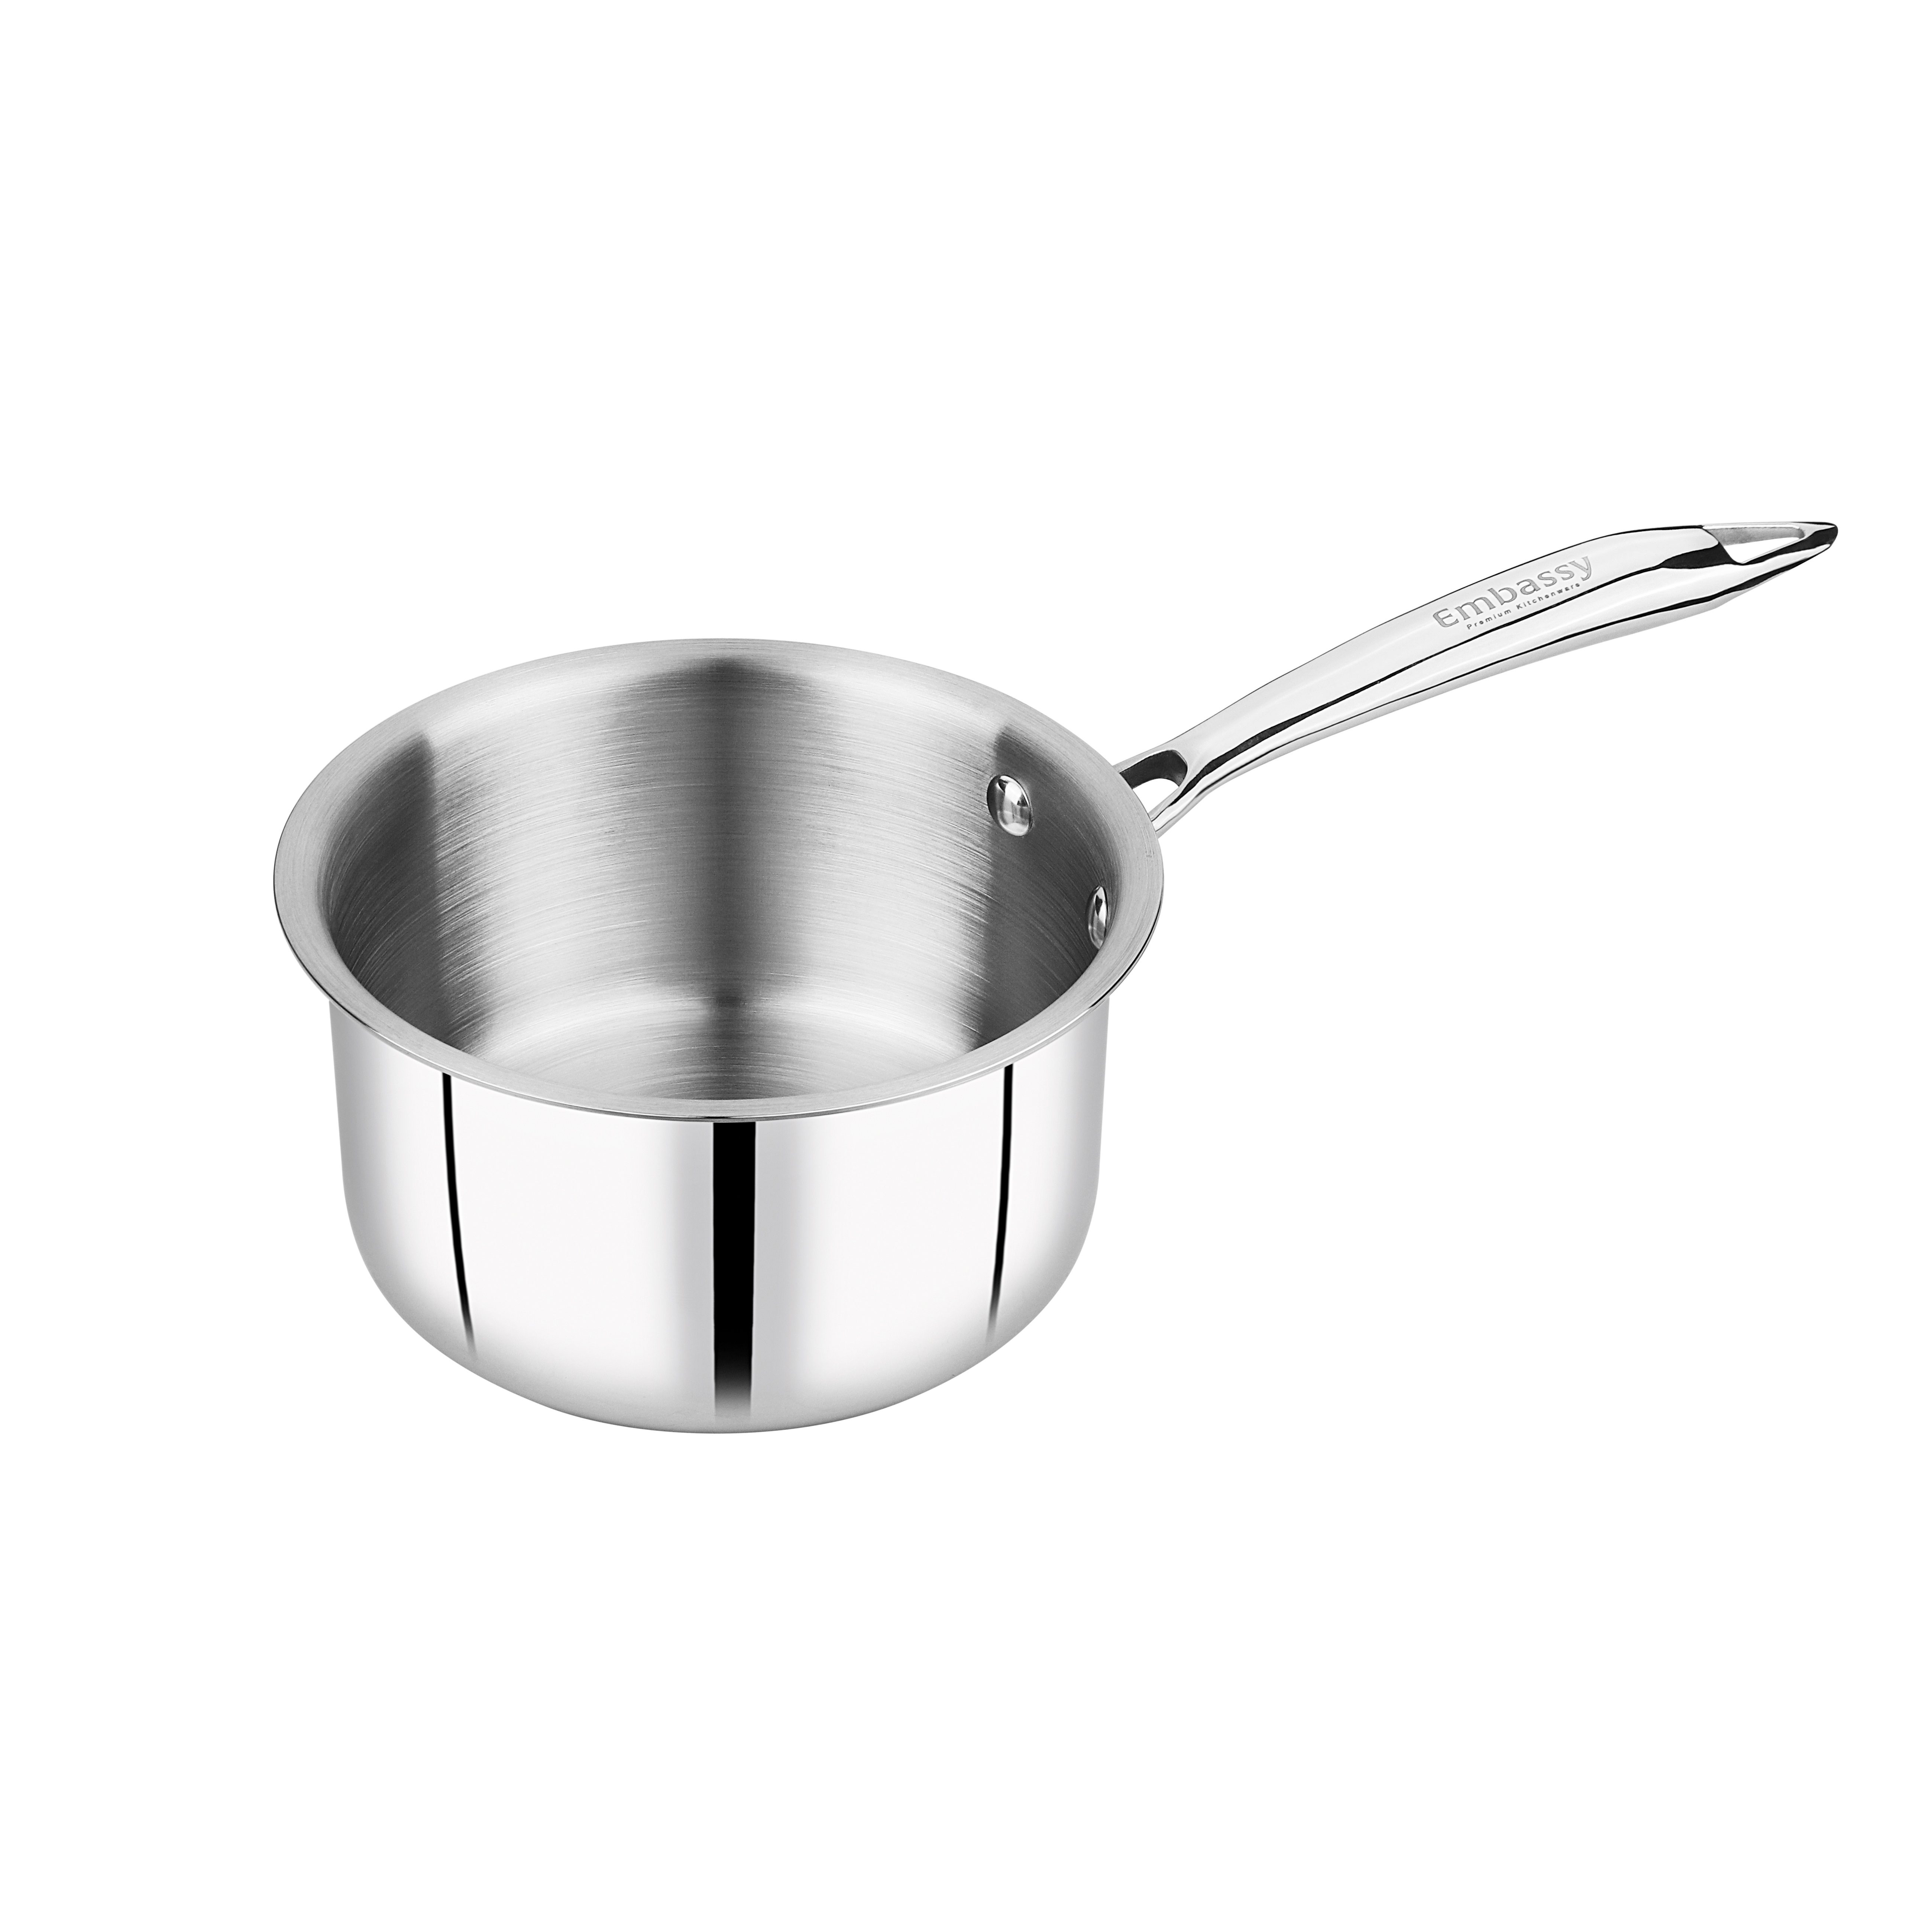 Embassy Stainless Steel Thickply Saucepan With Lid 15cm - Size 11